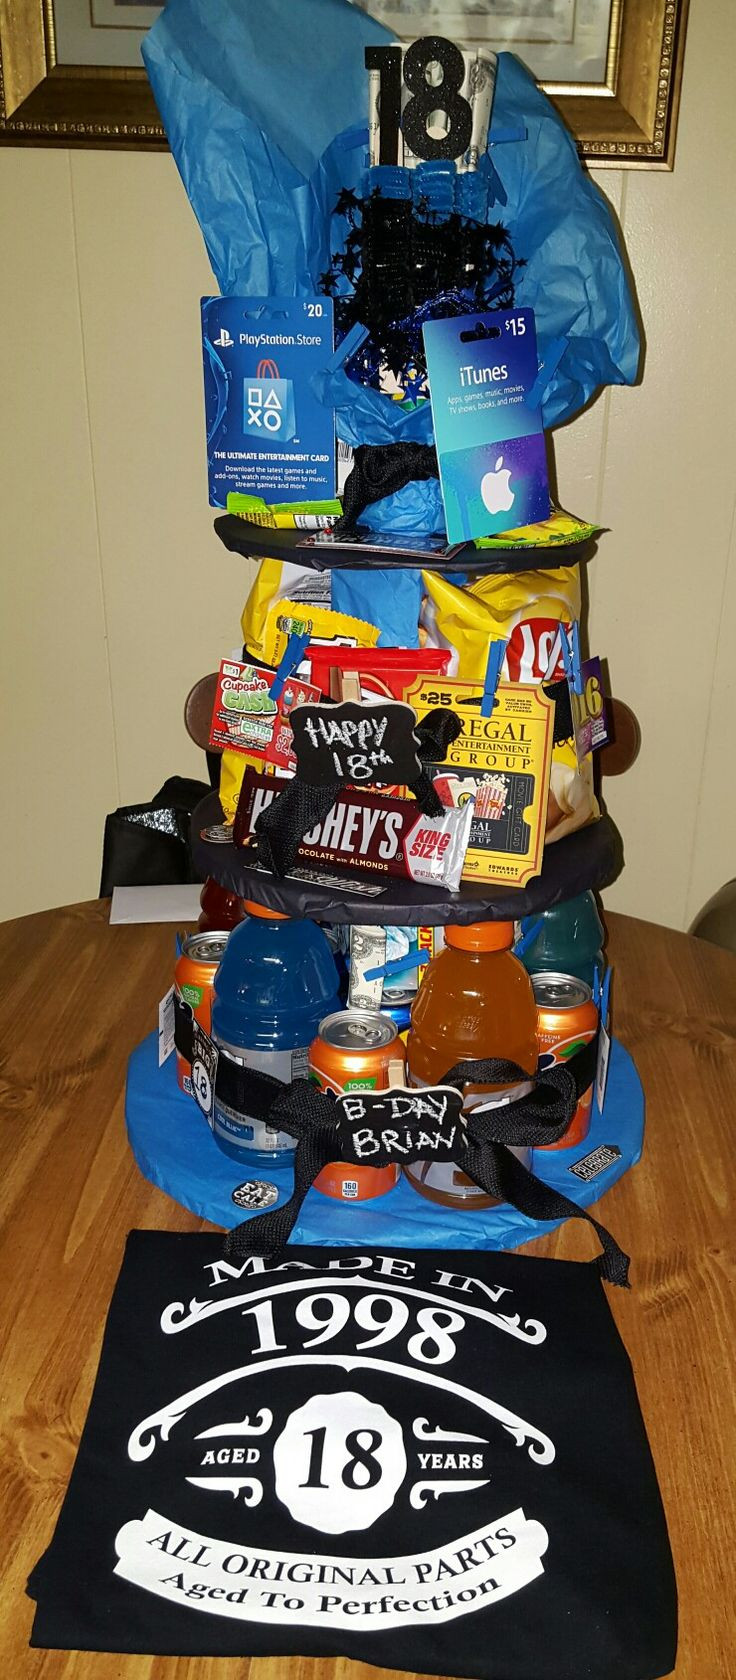 18th Birthday Party Ideas For Guys
 7 best Birthday Gift Ideas images on Pinterest